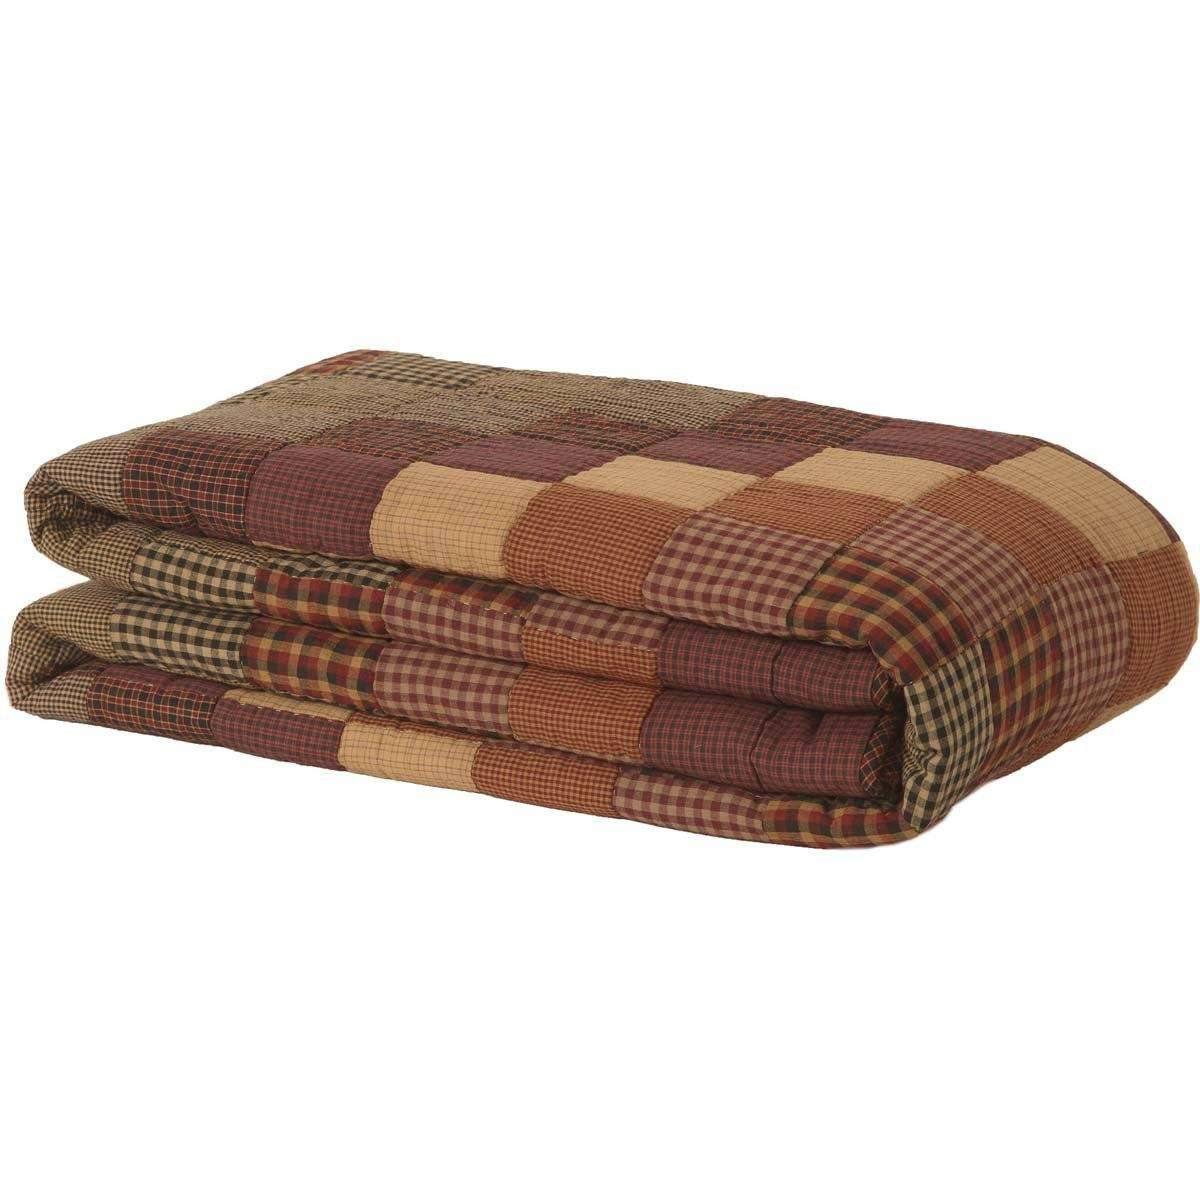 Heritage Farms Luxury King Quilt 120Wx105L VHC Brands folded